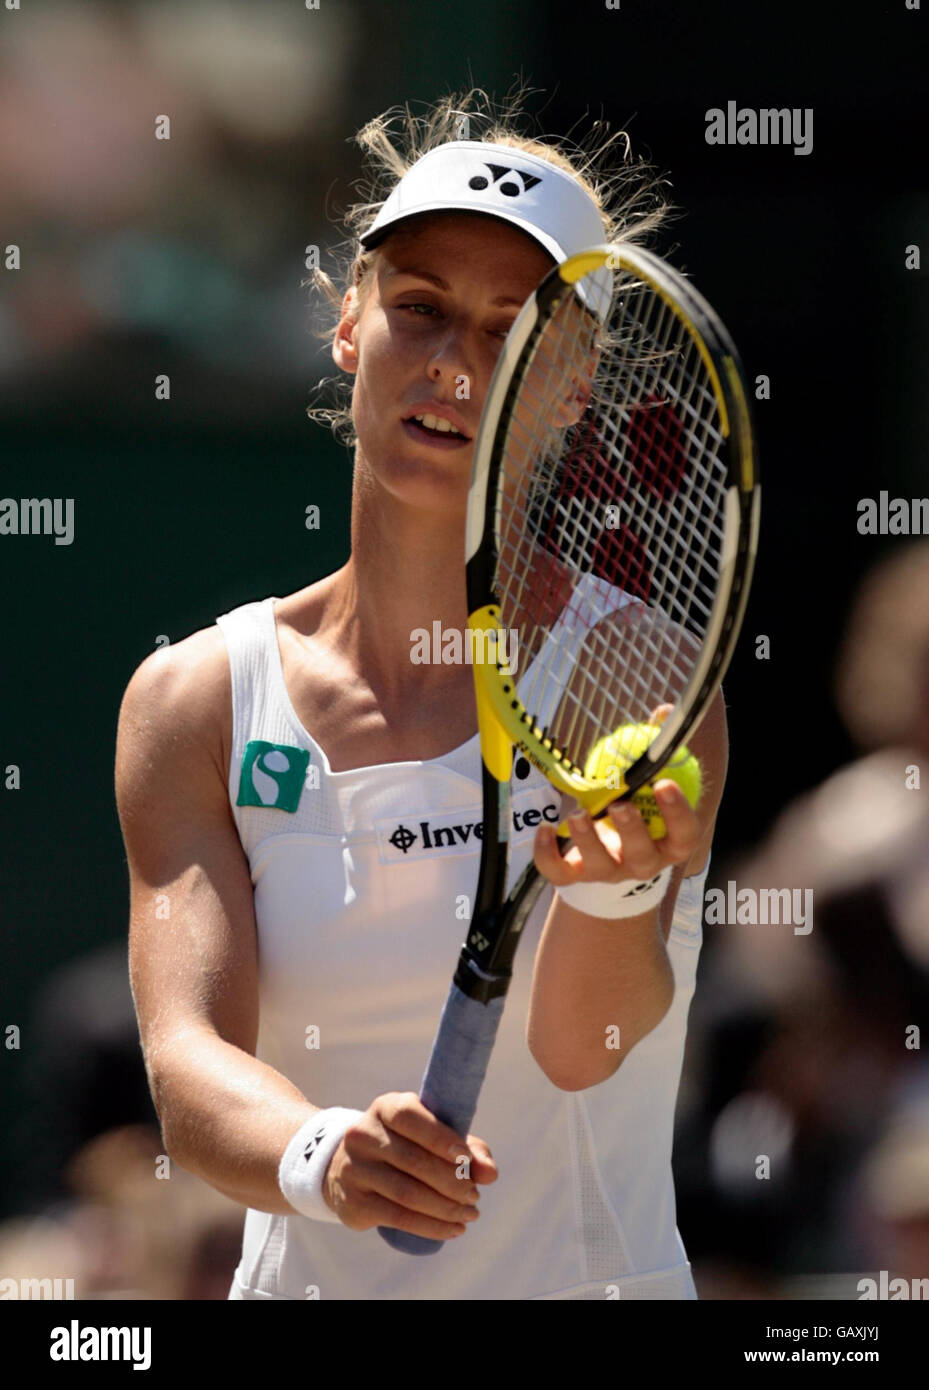 Russia's Elena Dementieva in action against Russia's Nadia Petrova during the Wimbledon Championships 2008 at the All England Tennis Club in Wimbledon. Stock Photo